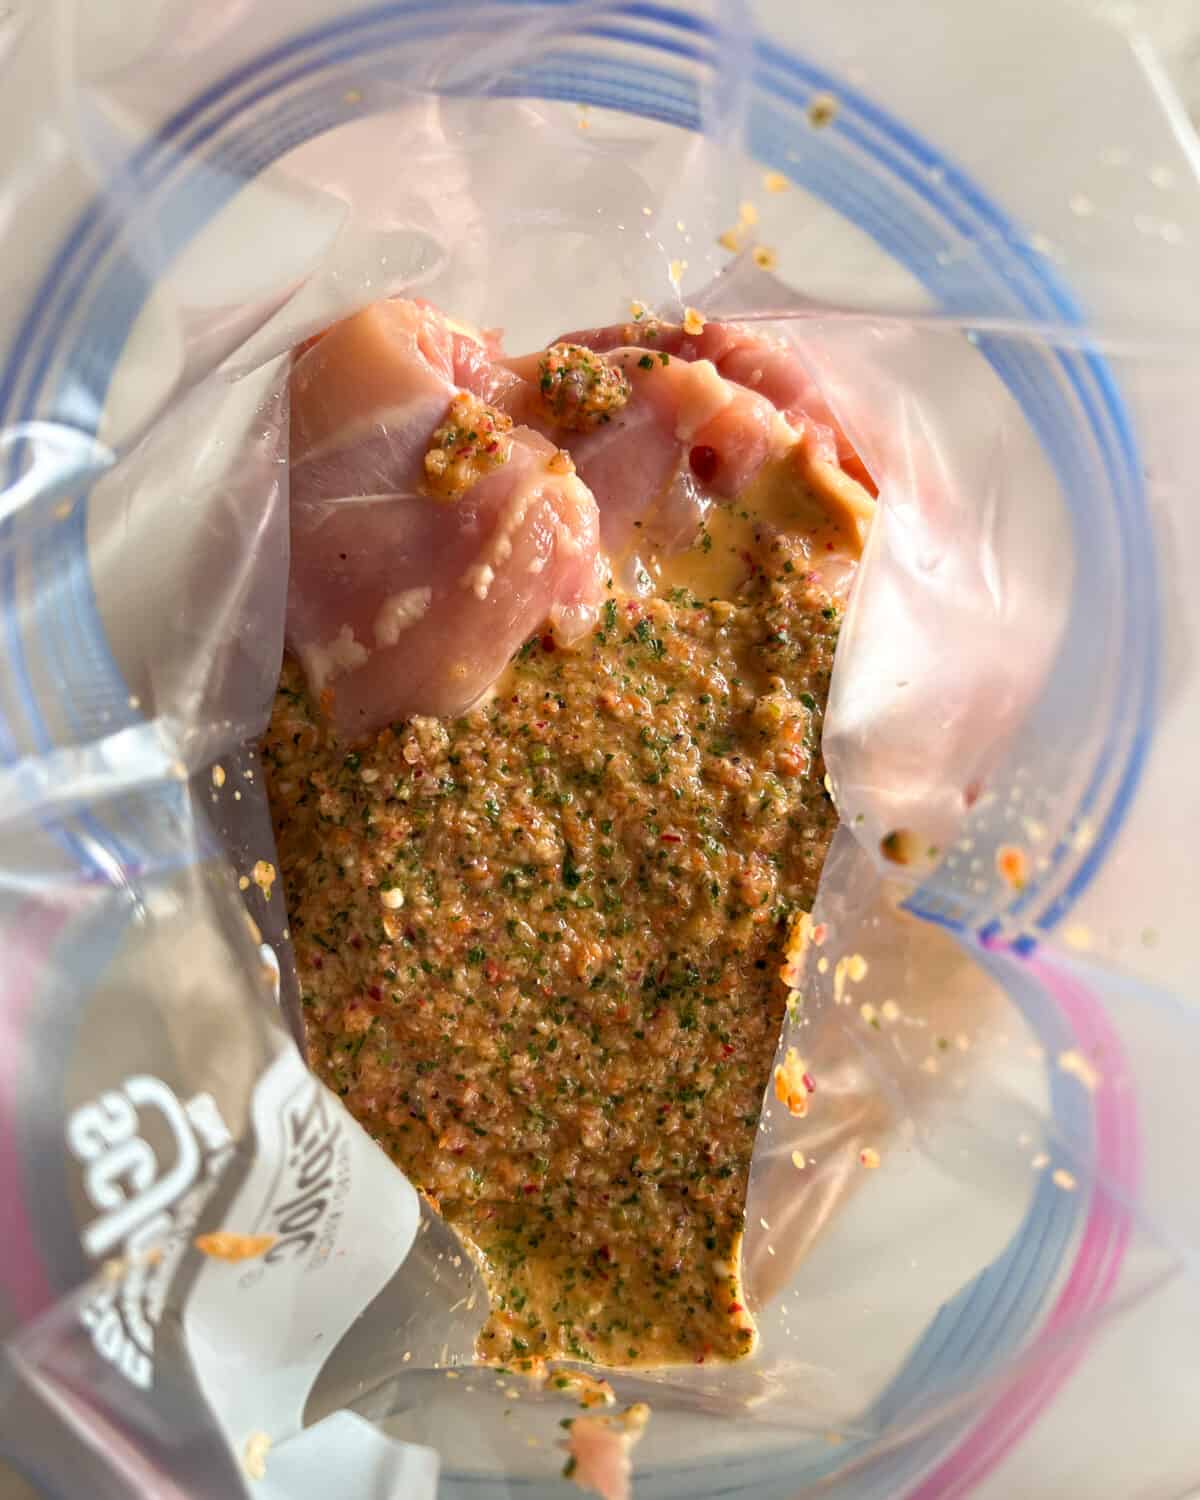 In a resealable bag, combine the rest of the sauce and the boneless skinless chicken thighs and marinate for 1-4 hours.